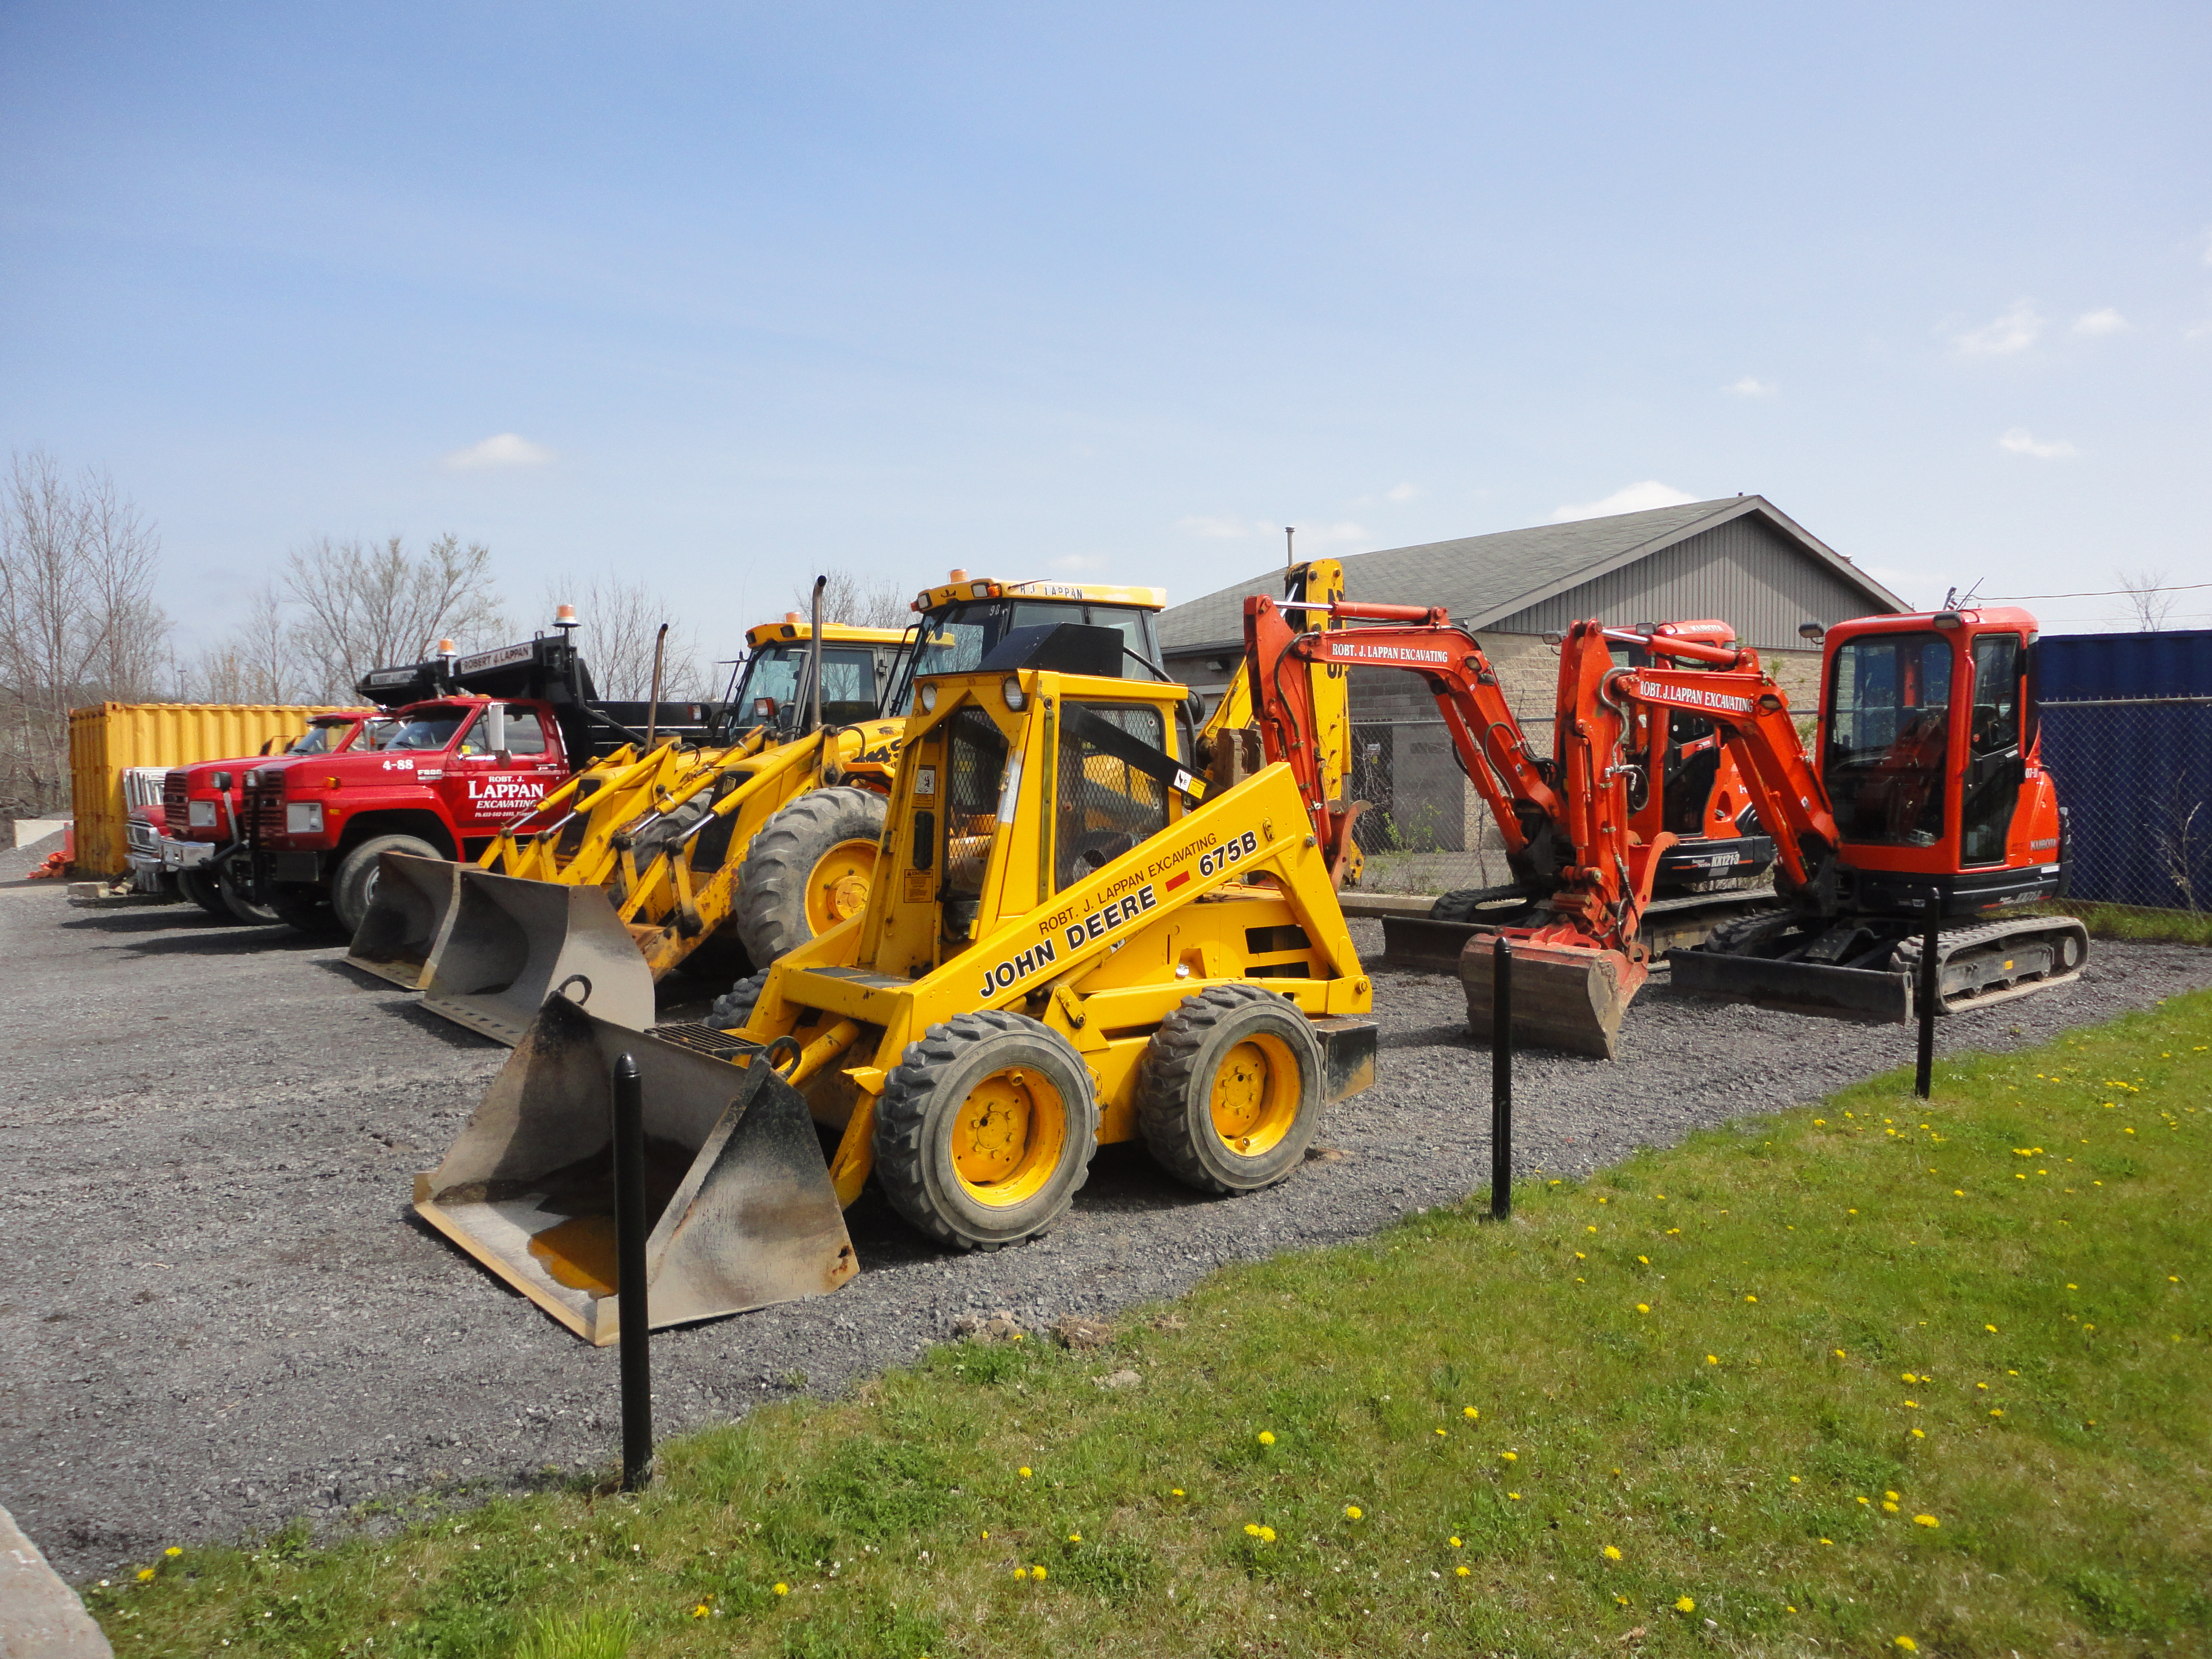 Robert J. Lappan Excavating - Our Services